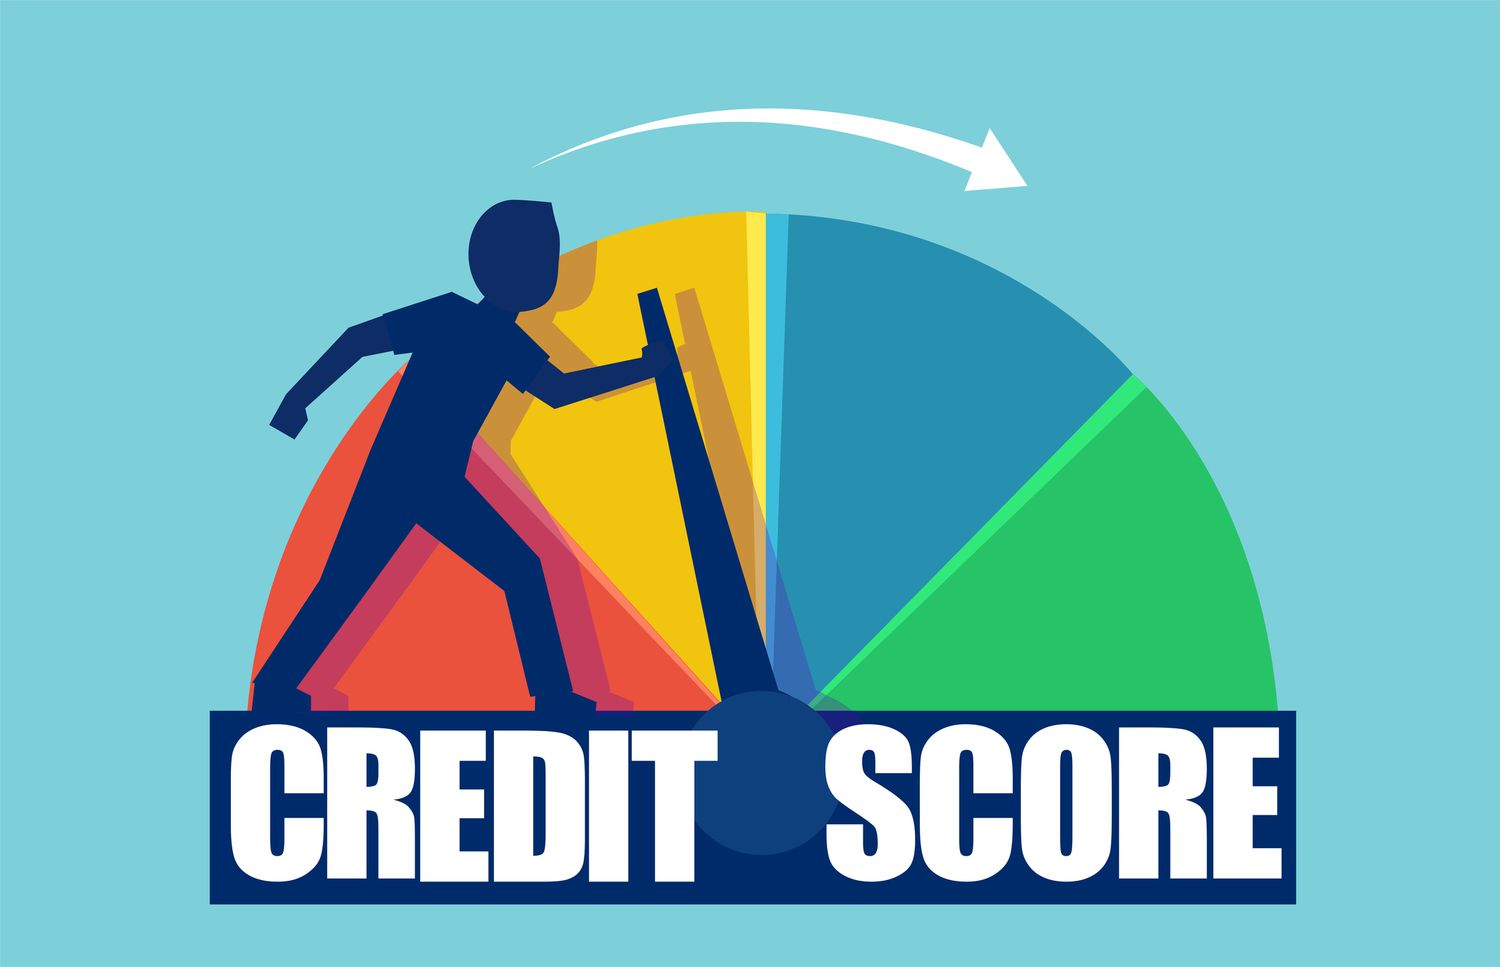 Tips to Help Improve Your Credit Score